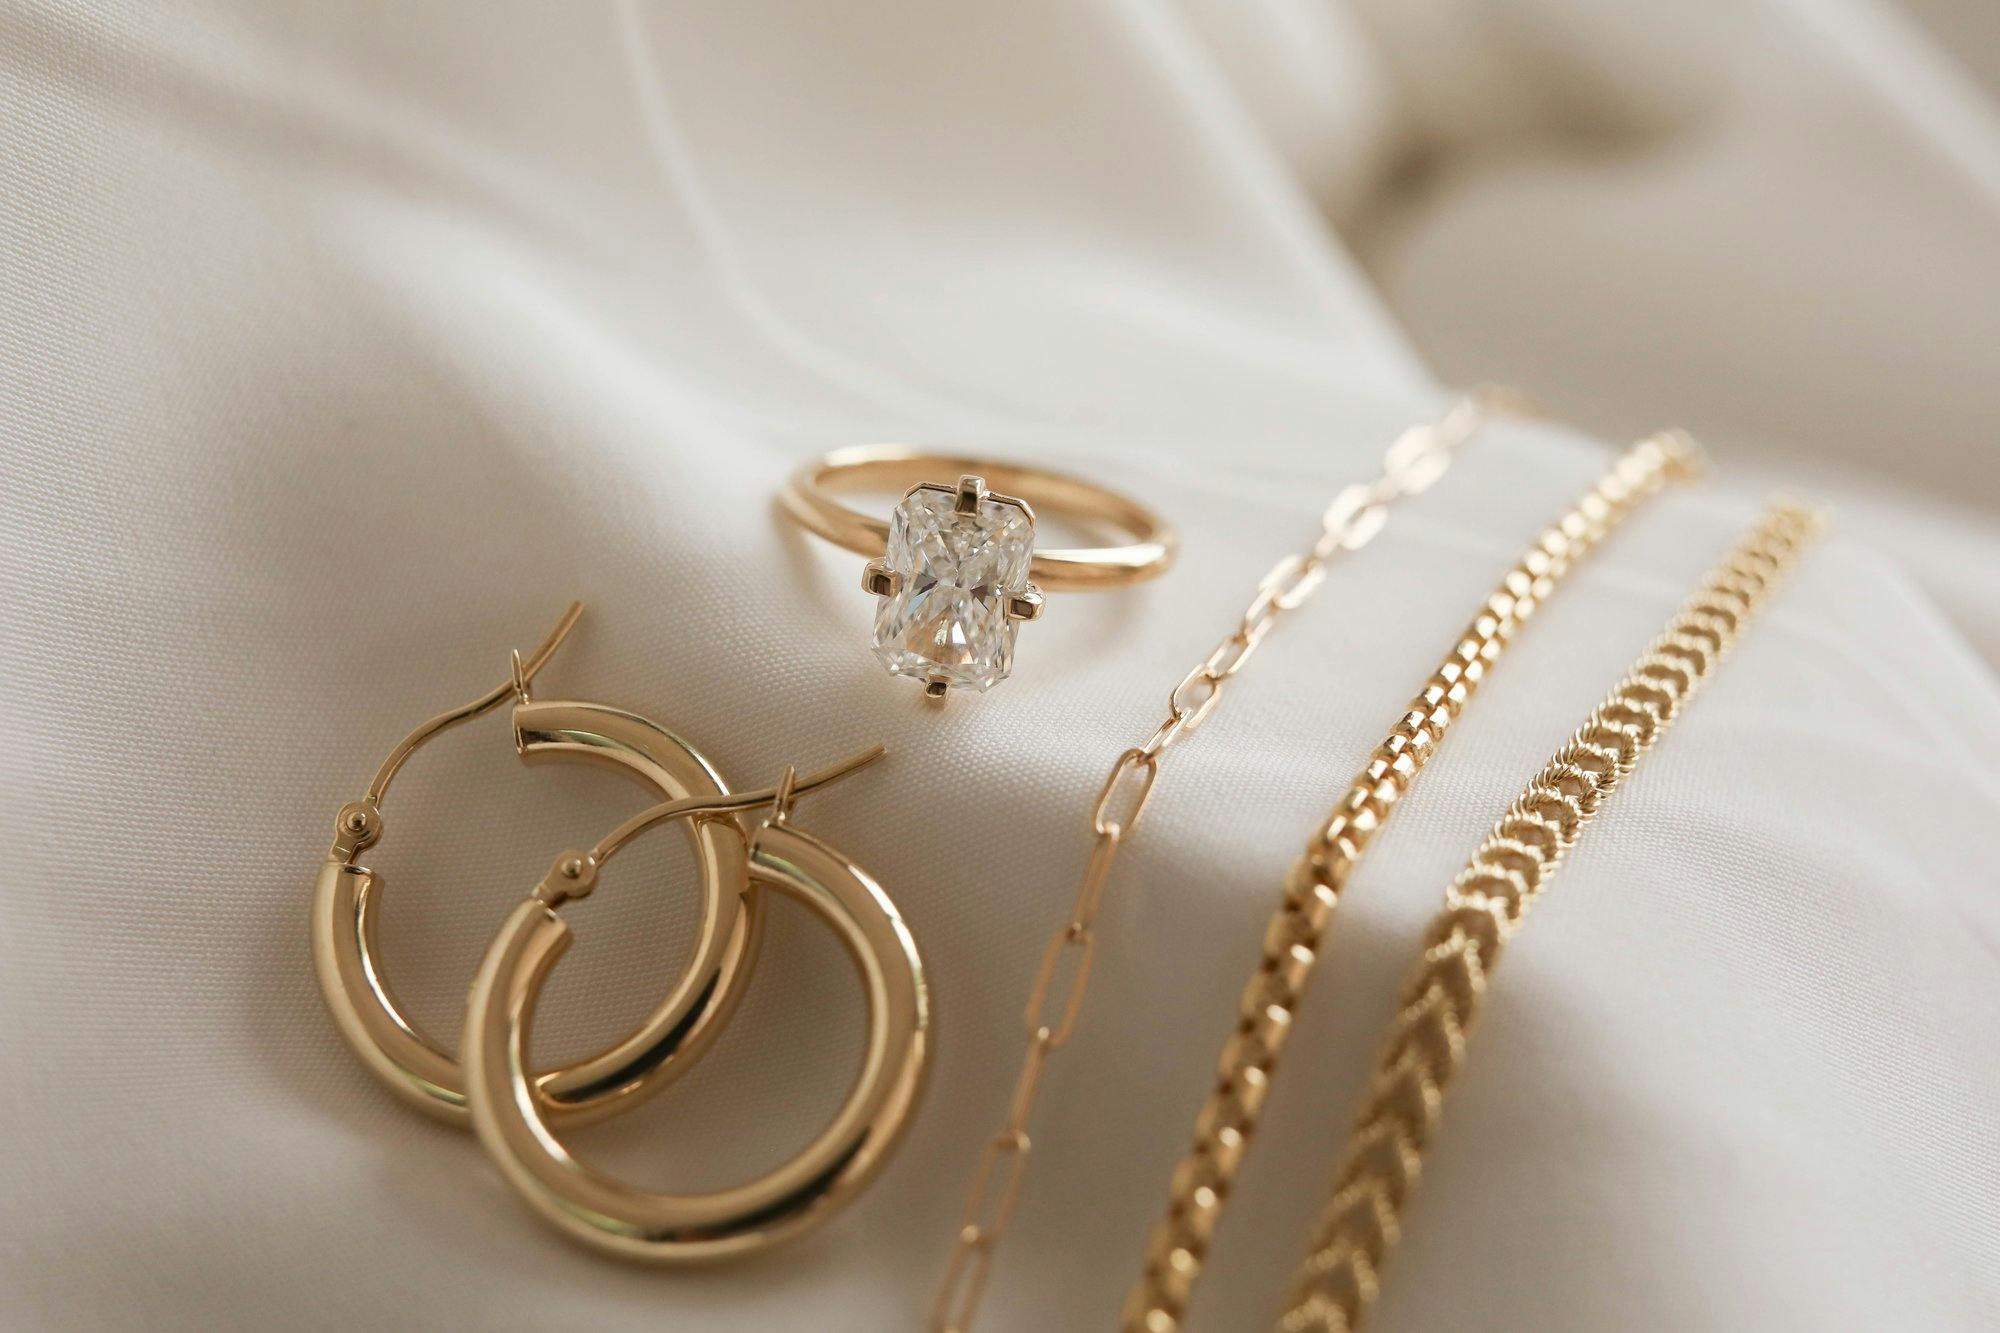 a group shot of a lab diamond ring with other gold jewelry like earrings and bracelets